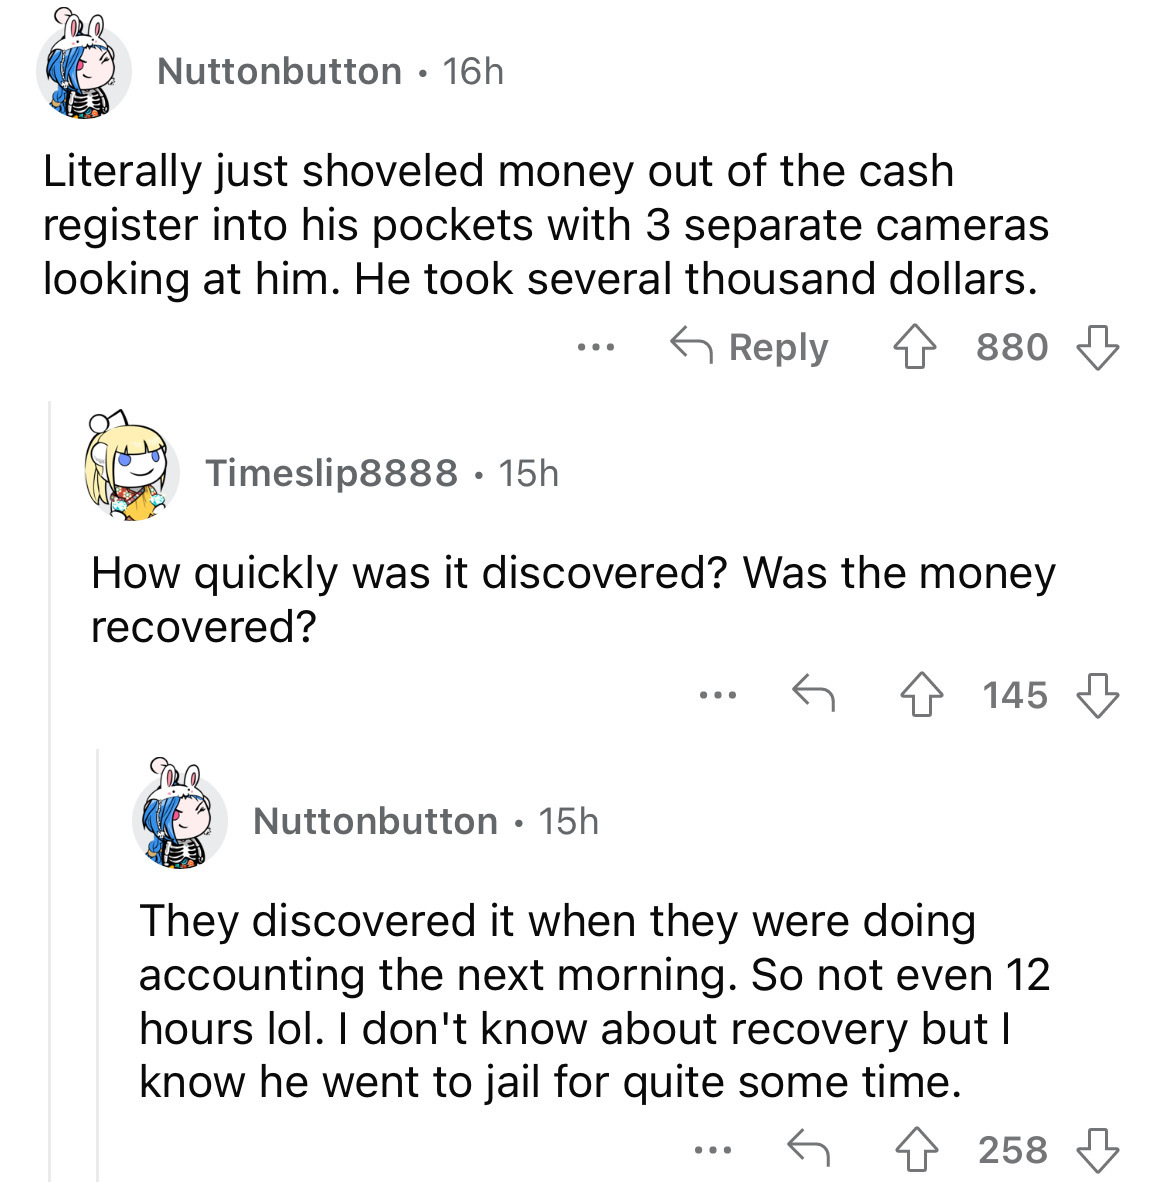 screenshot - Nuttonbutton 16h Literally just shoveled money out of the cash register into his pockets with 3 separate cameras looking at him. He took several thousand dollars. 880 Timeslip8888 15h How quickly was it discovered? Was the money recovered? 14